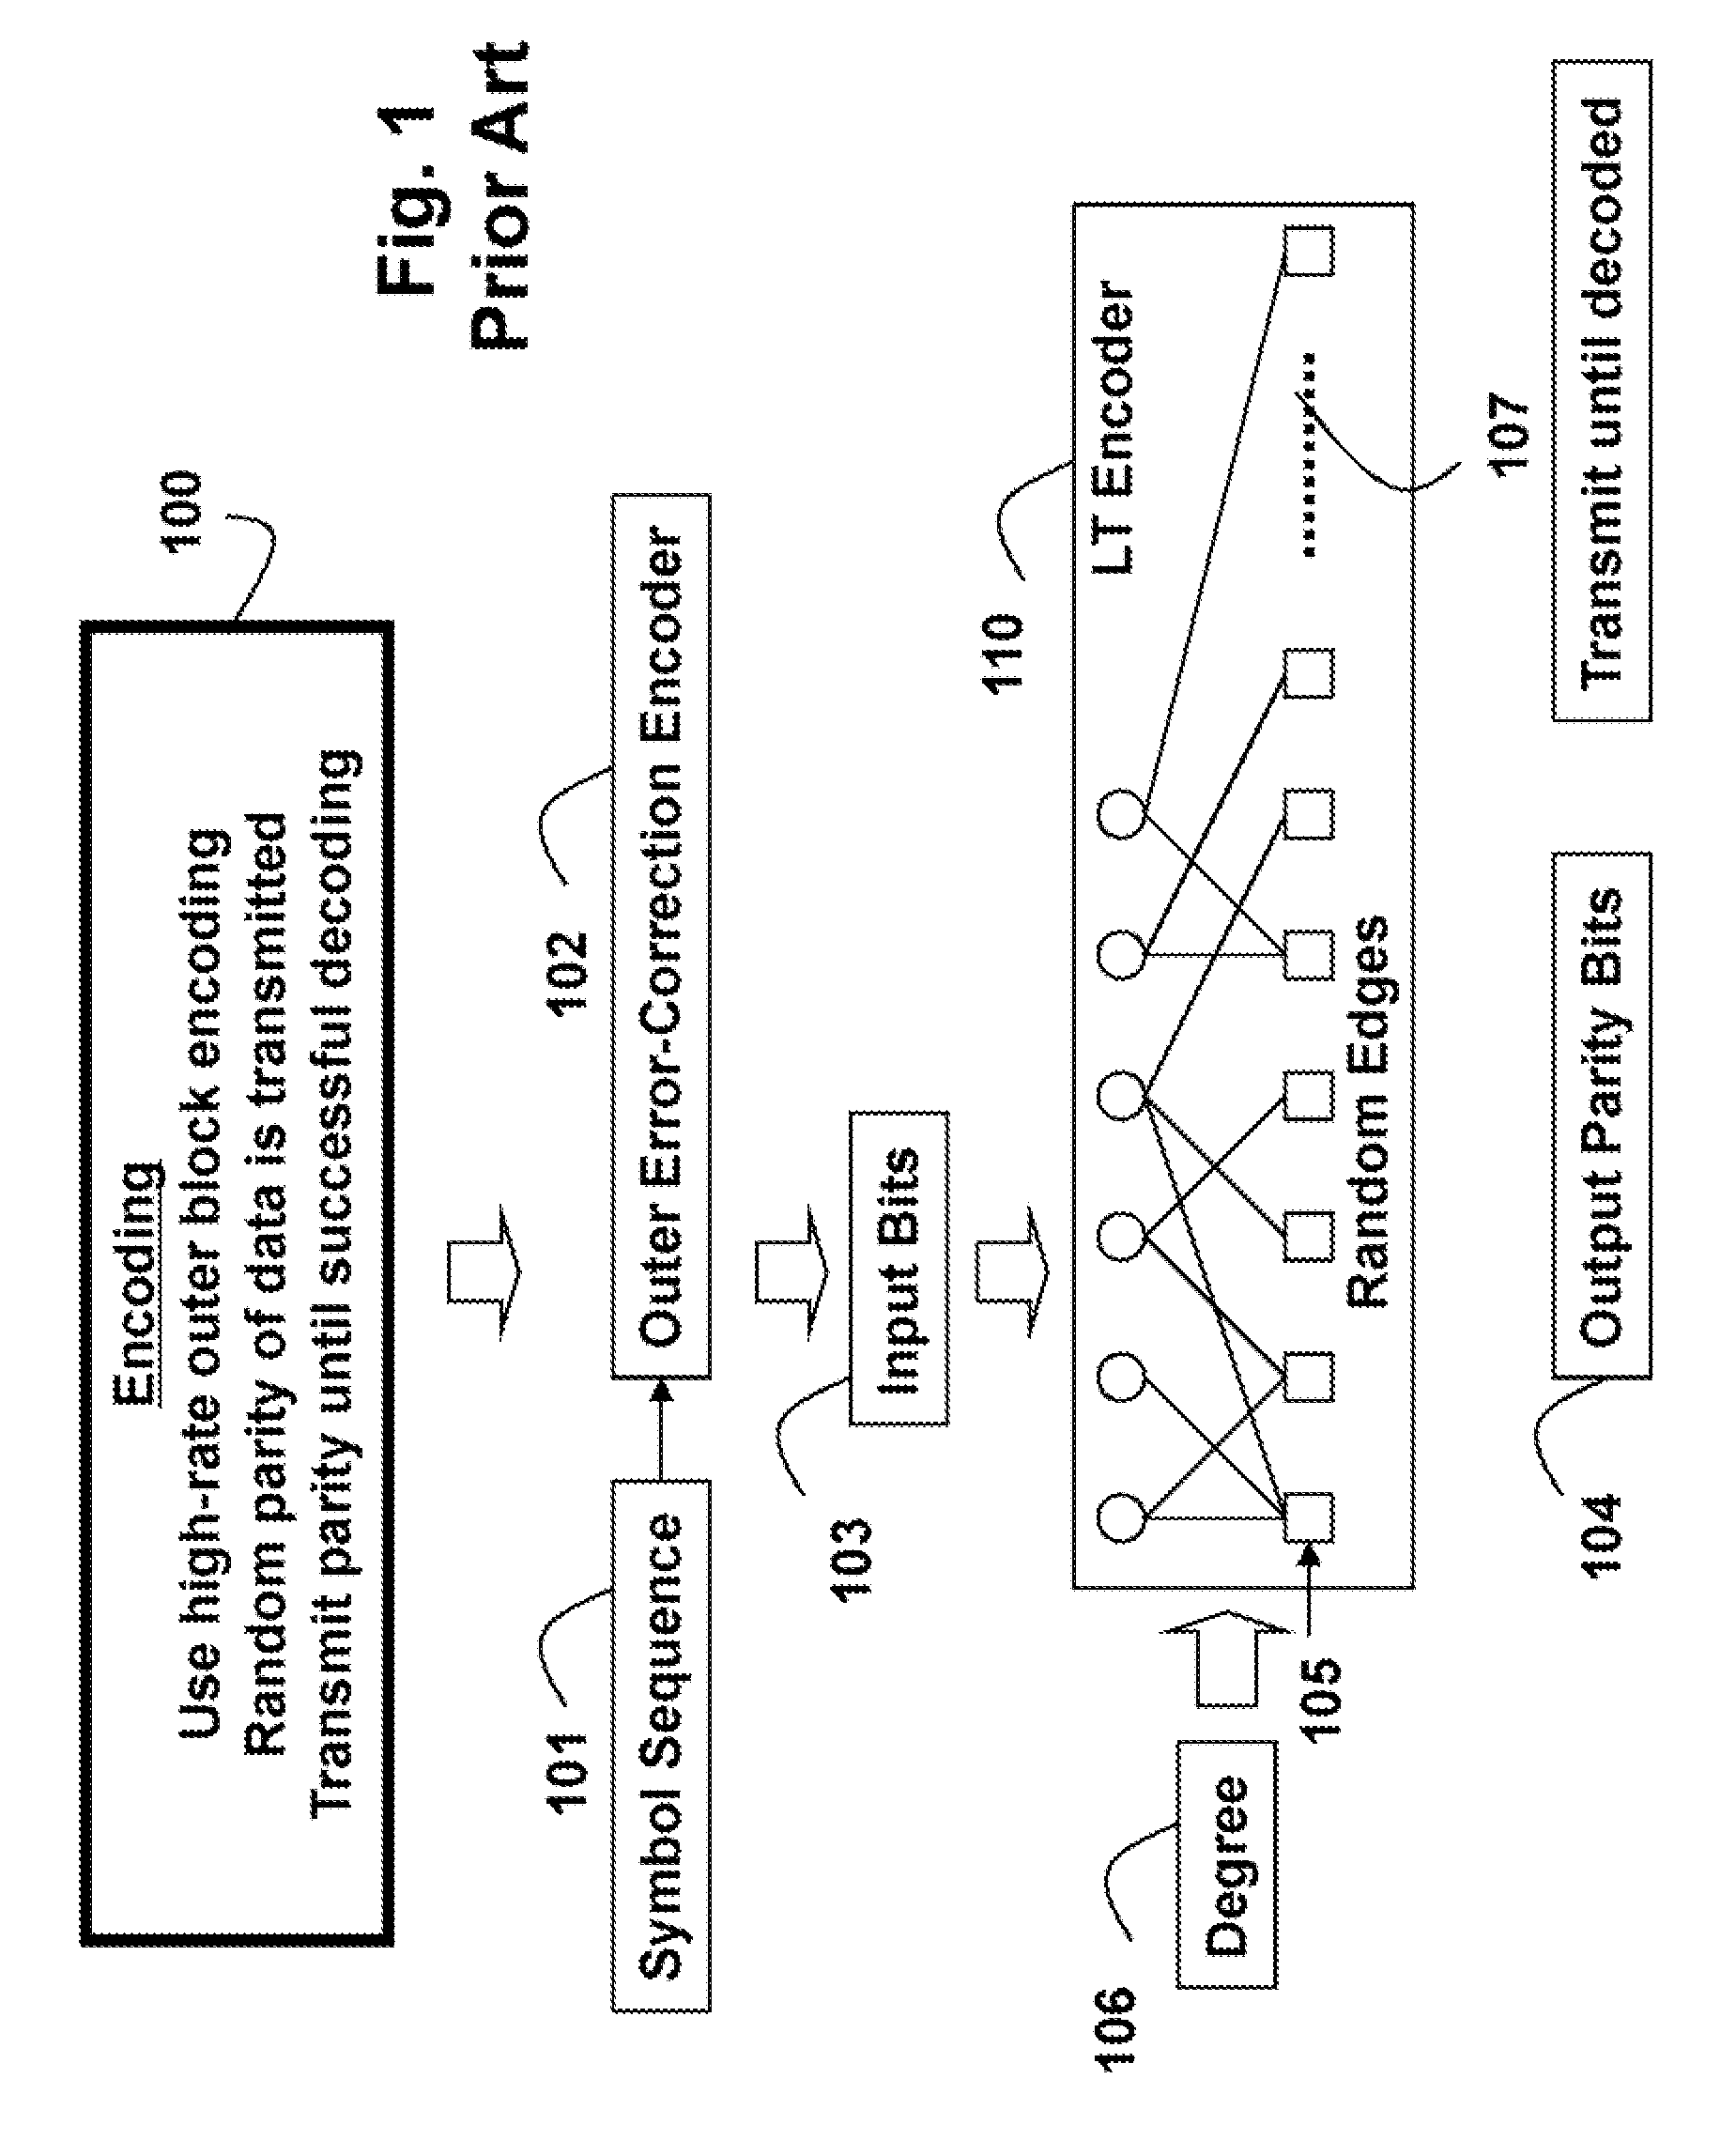 Method and system for communicating multimedia using reconfigurable rateless codes and decoding in-process status feedback